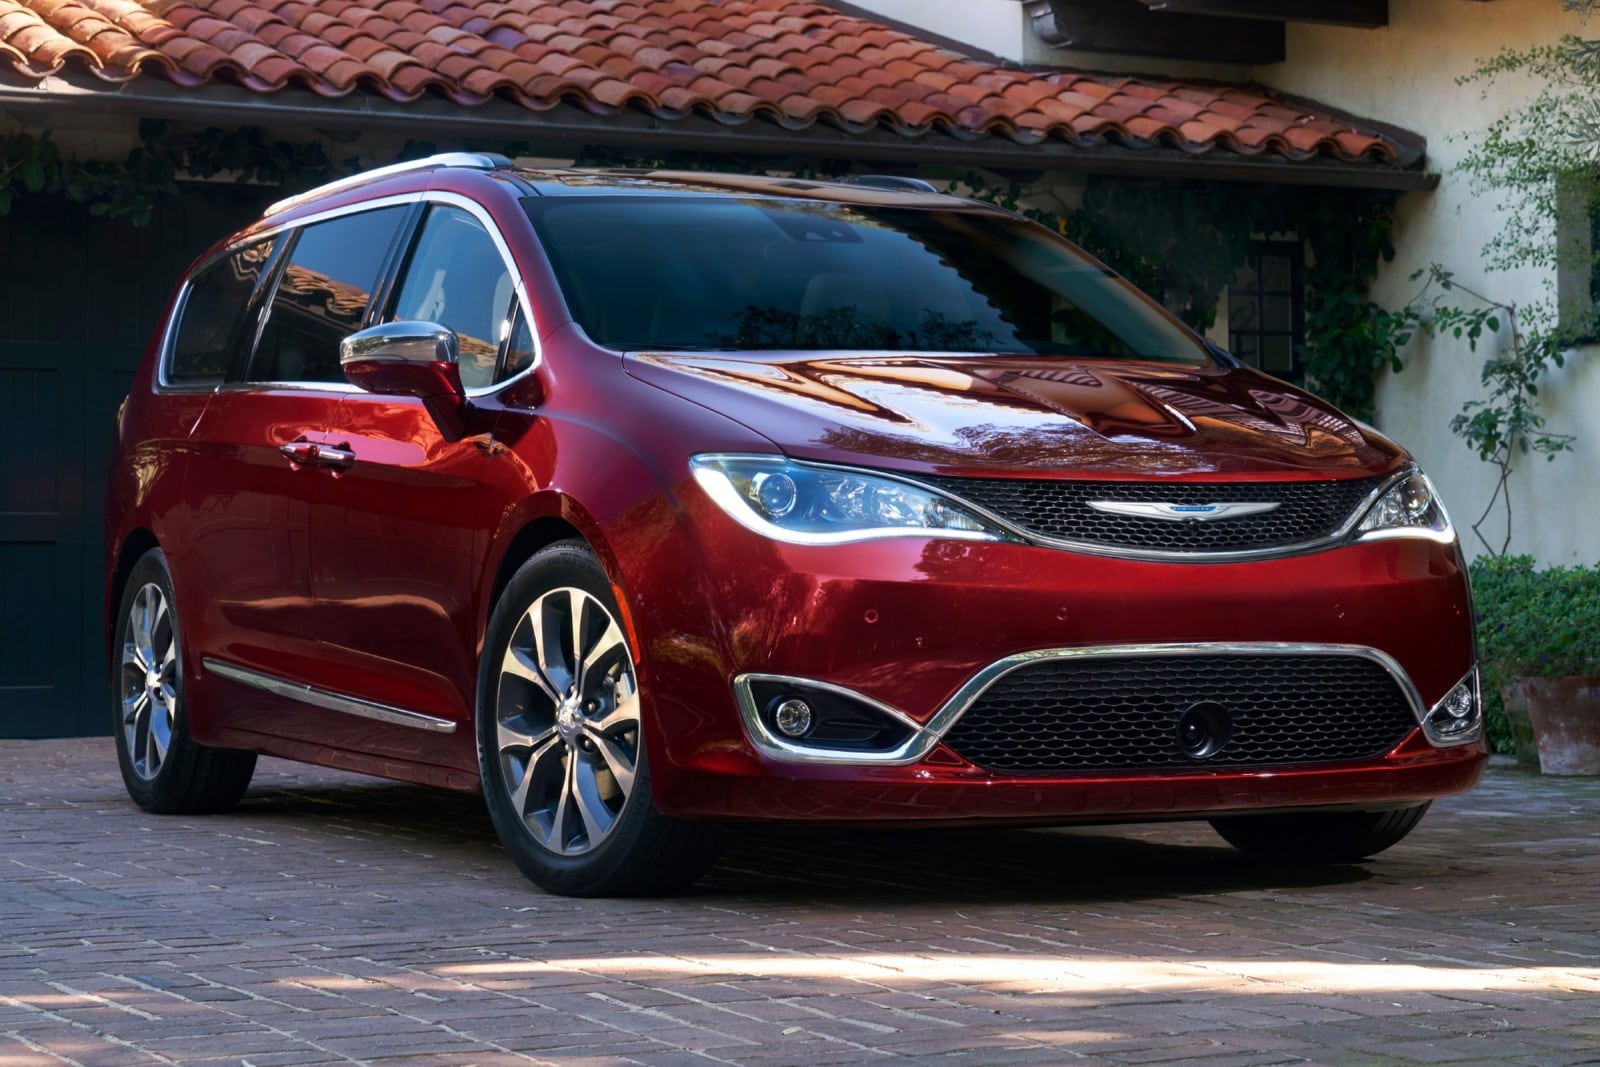 2017 Chrysler Pacifica Review & Ratings | Edmunds